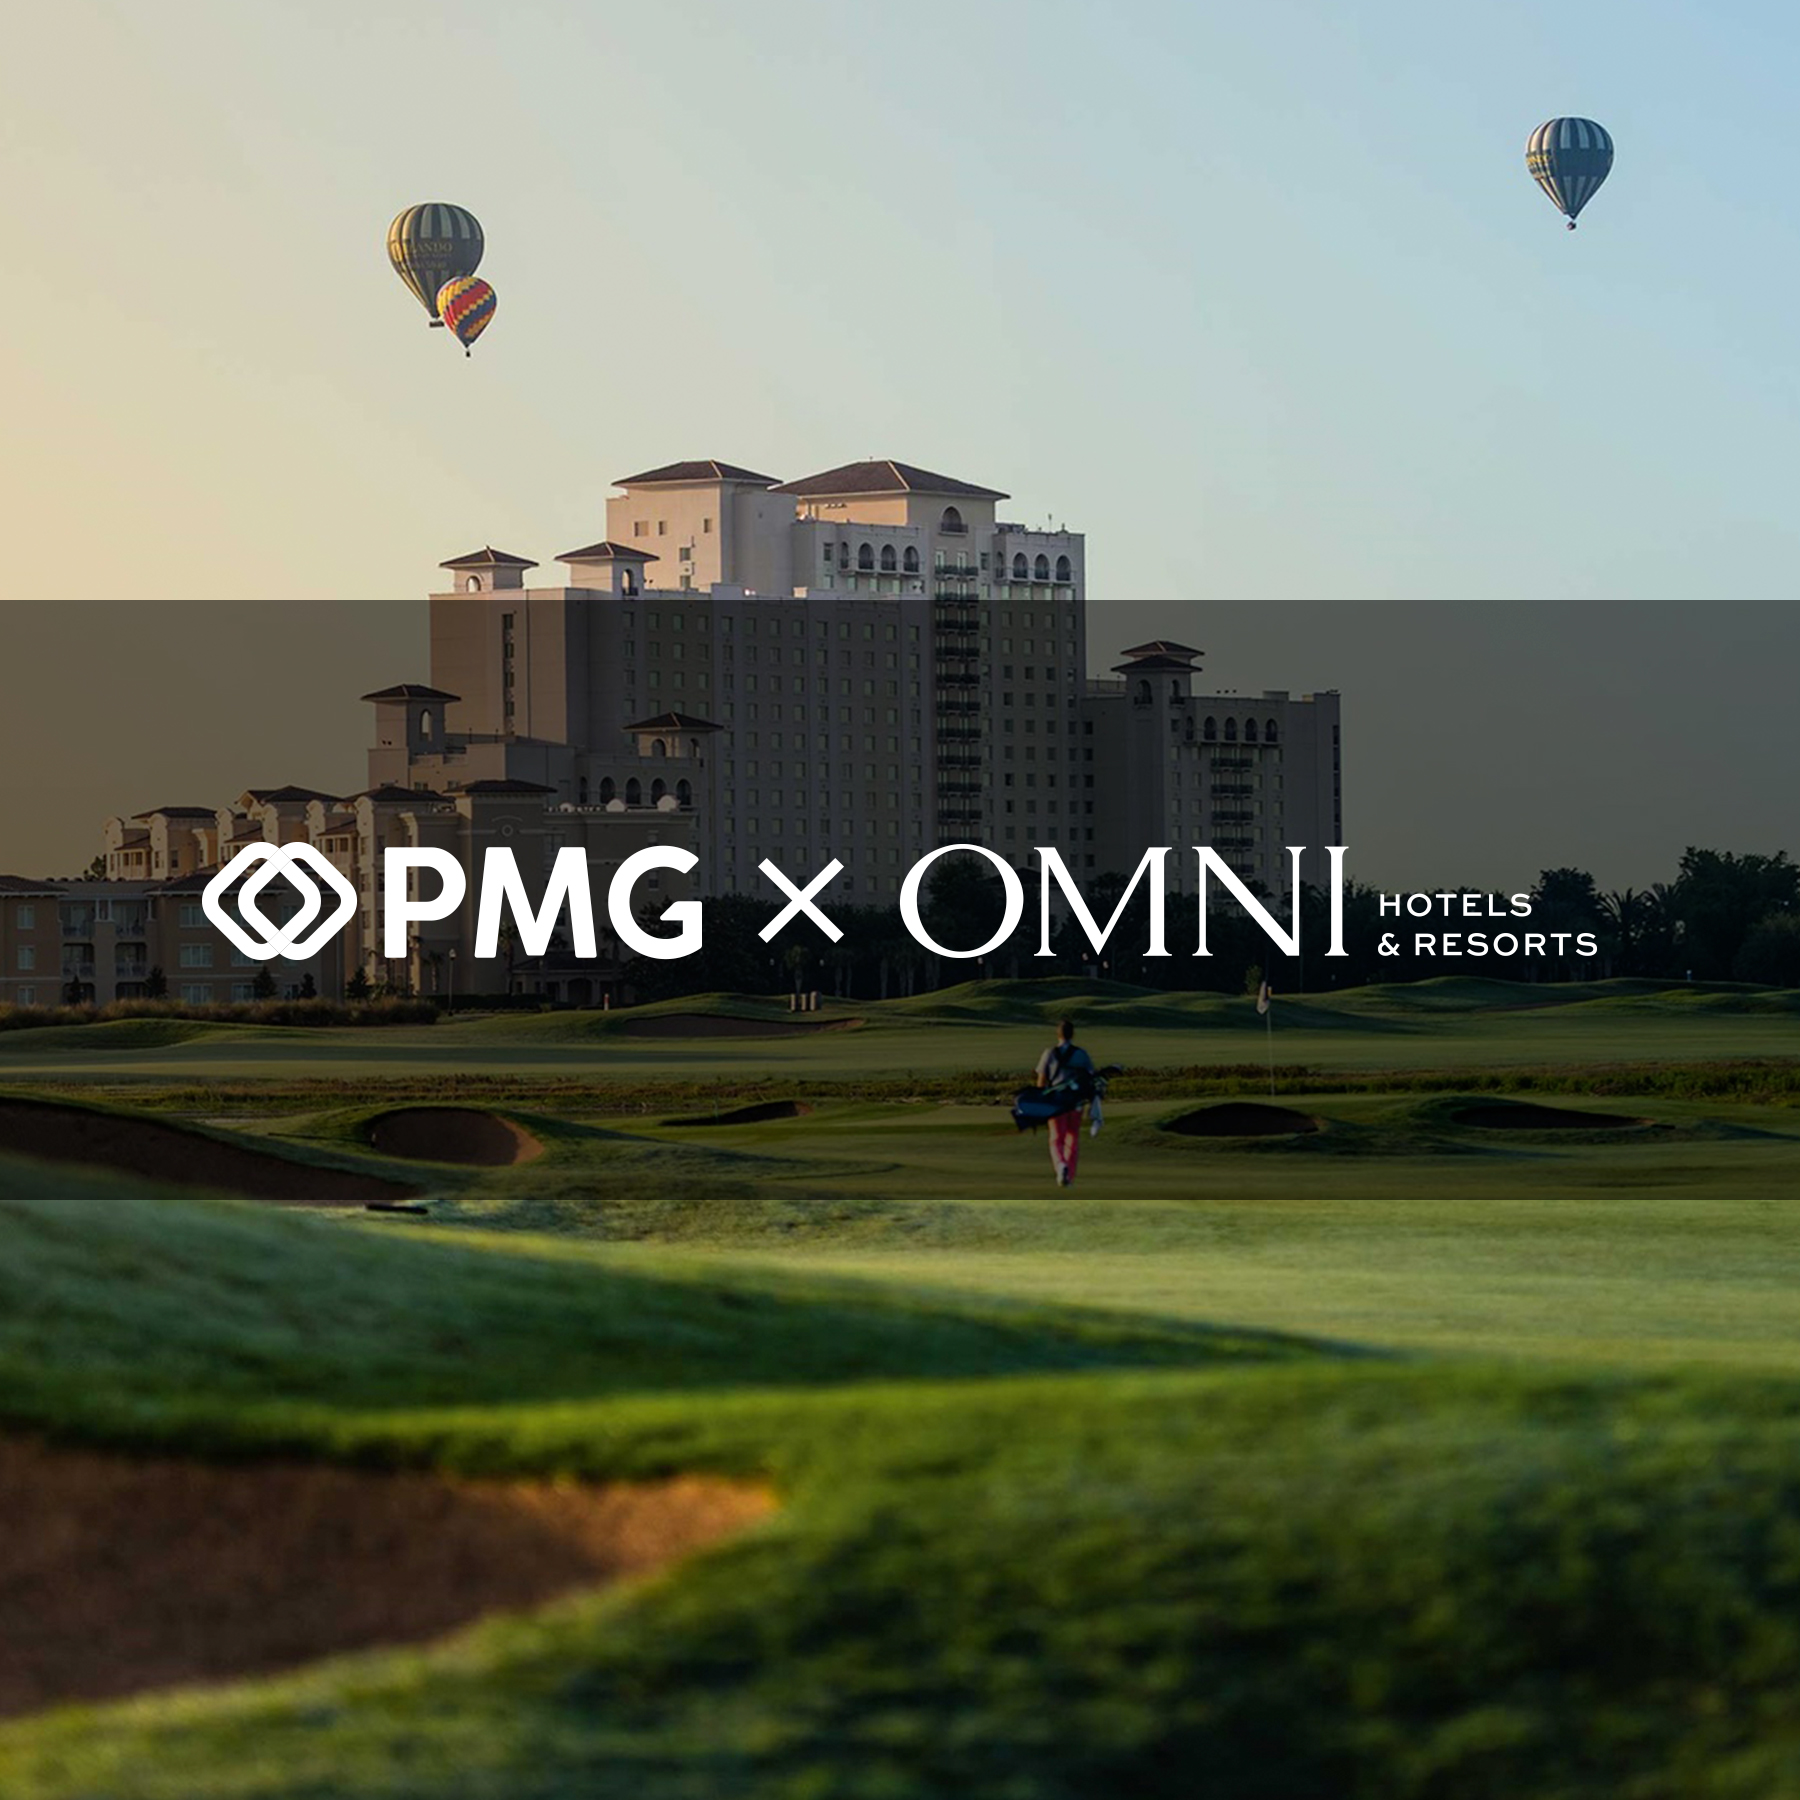 Omni Hotels & PMG Drive 4X Conversions with Novel, Privacy-First Approach